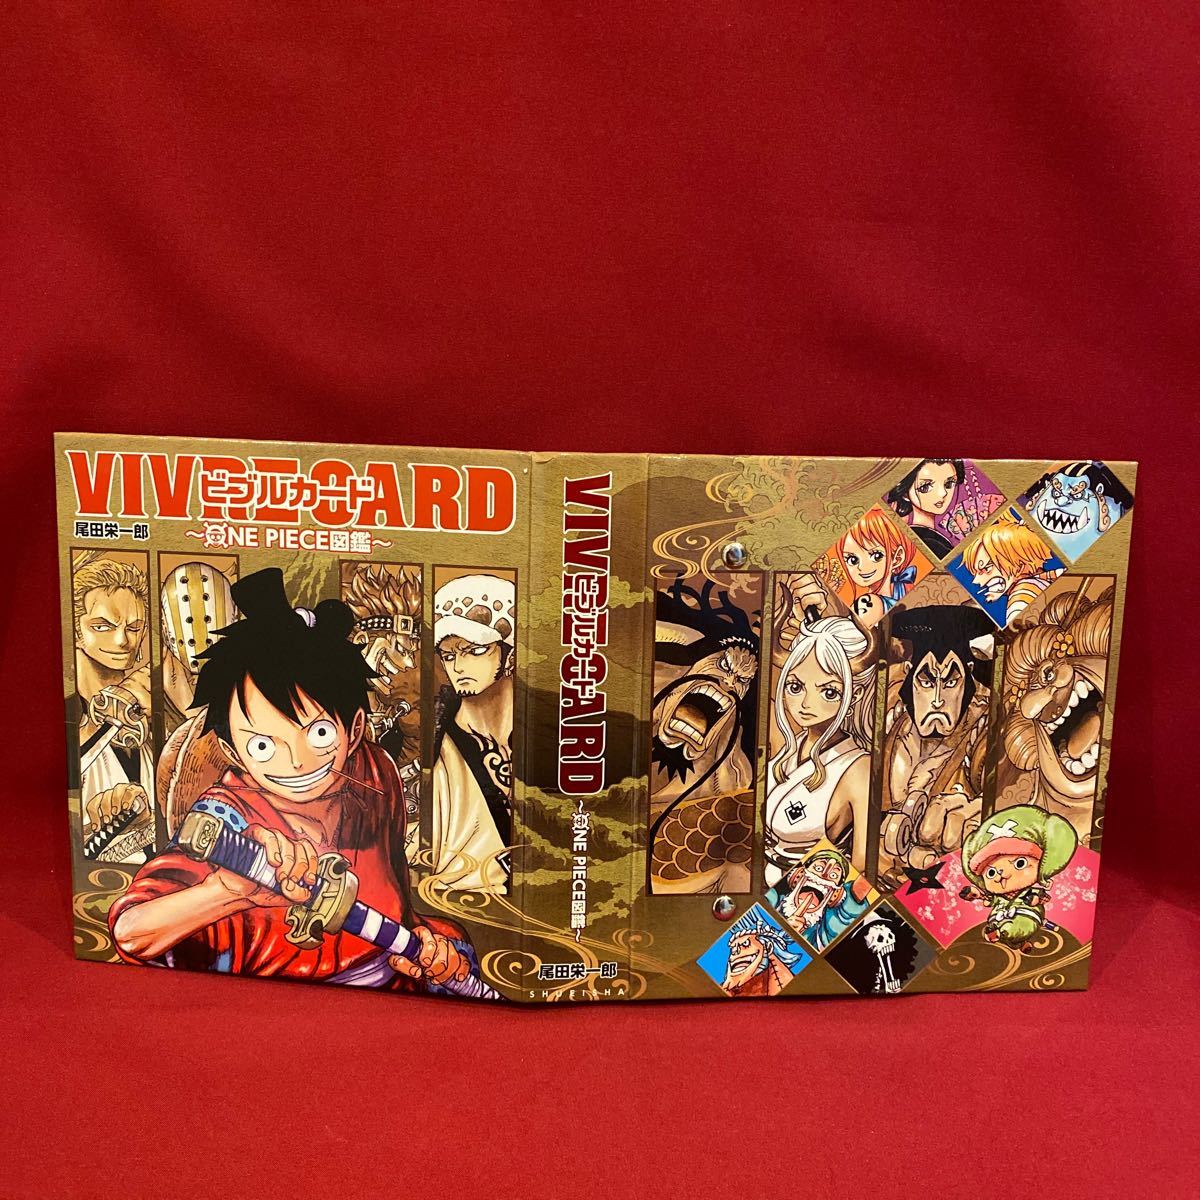 ONE PIECEバインダー/ビブルカード2冊/ONE PIECE図鑑セット